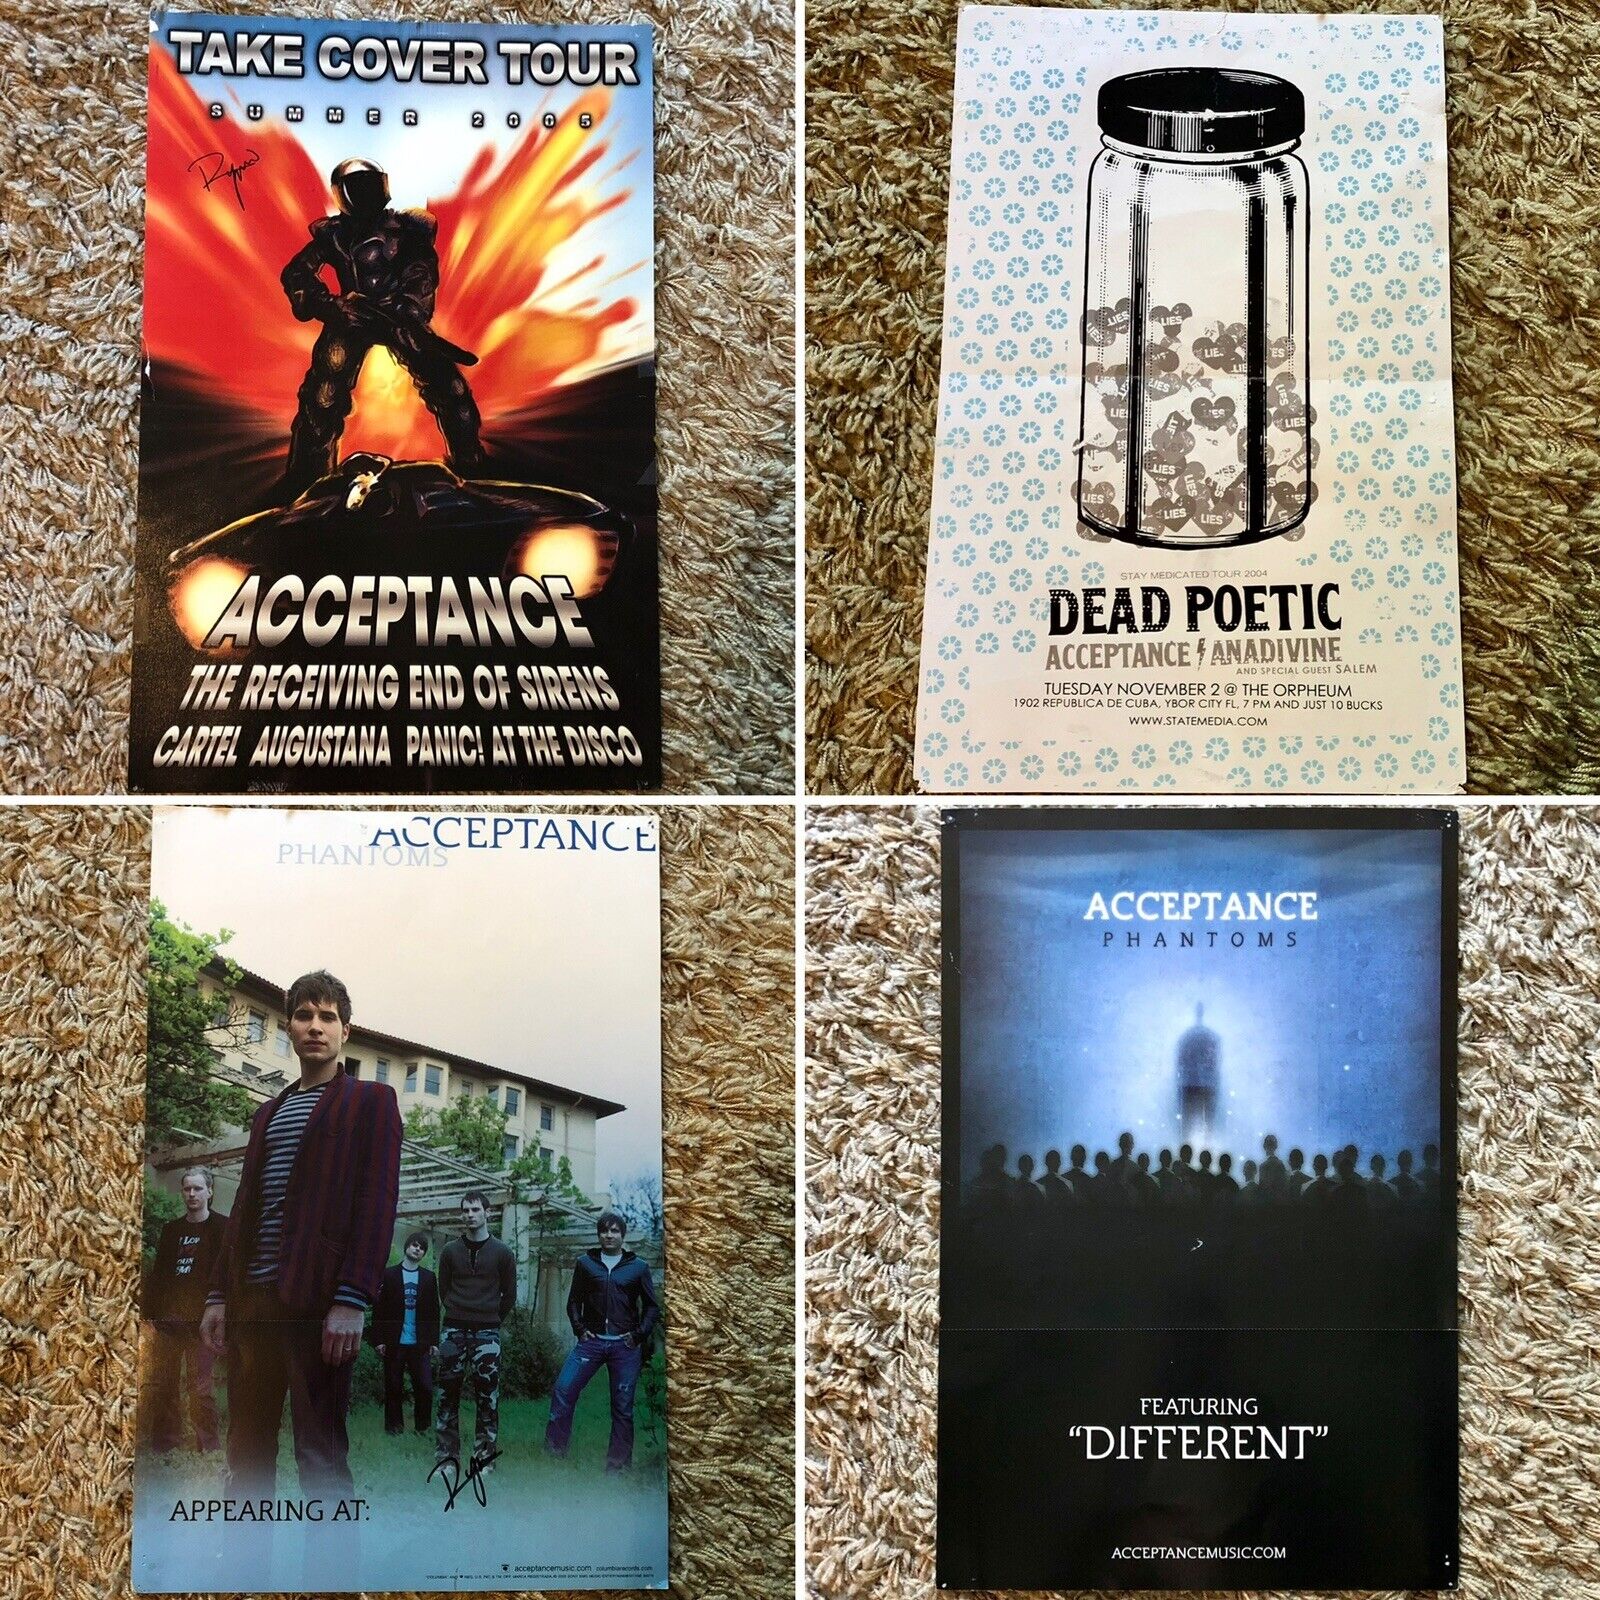 Lot Import of 3 Acceptance Prints Posters Poet At Panic Disco Atlanta Mall Dead The